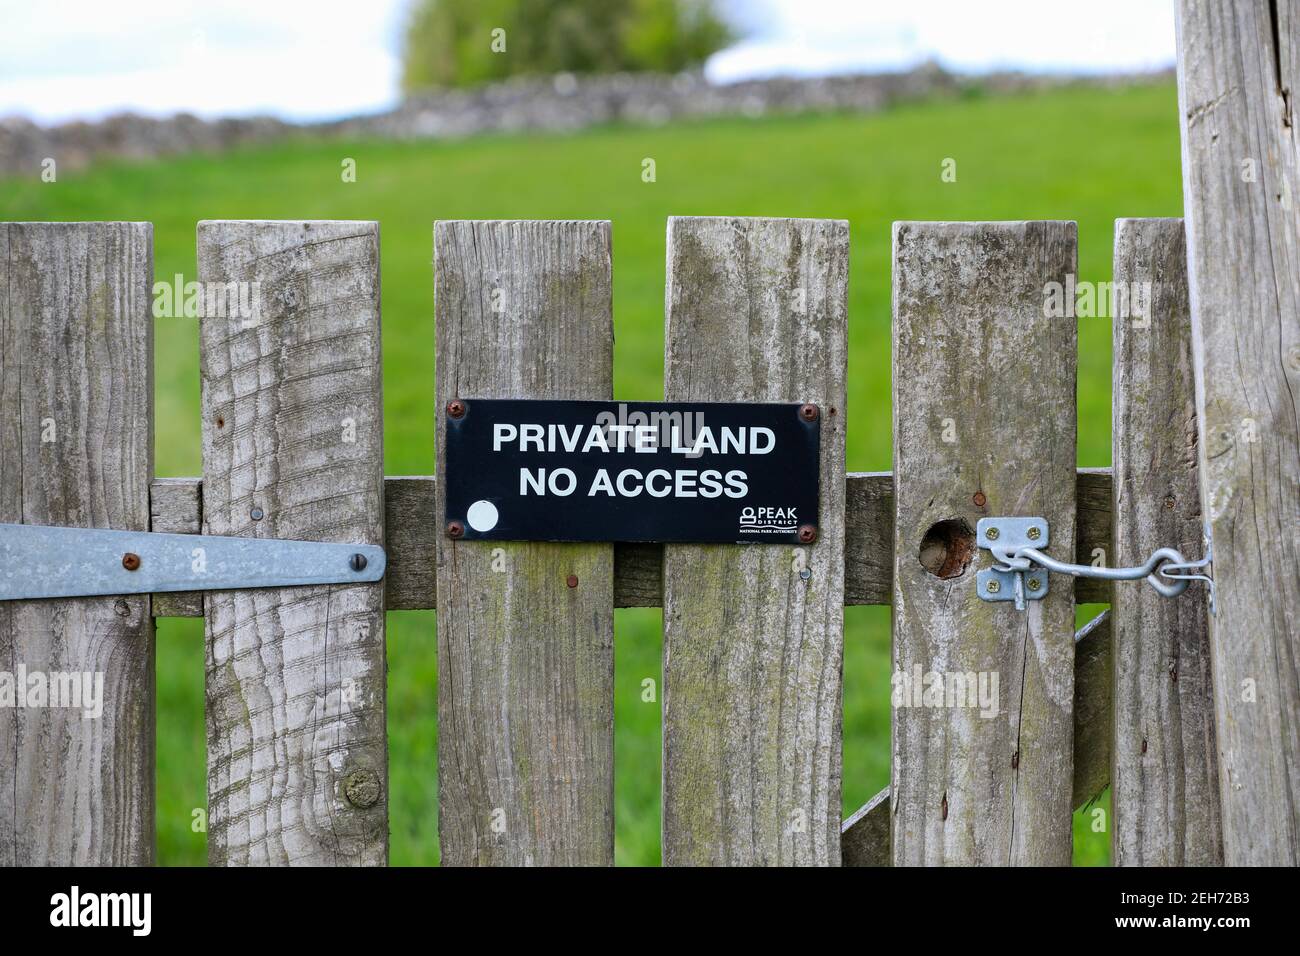 A sign on a wooden gate saying 'Private land, no access' provided by the Peak District National Park, Sheldon, Derbyshire, England, UK Stock Photo